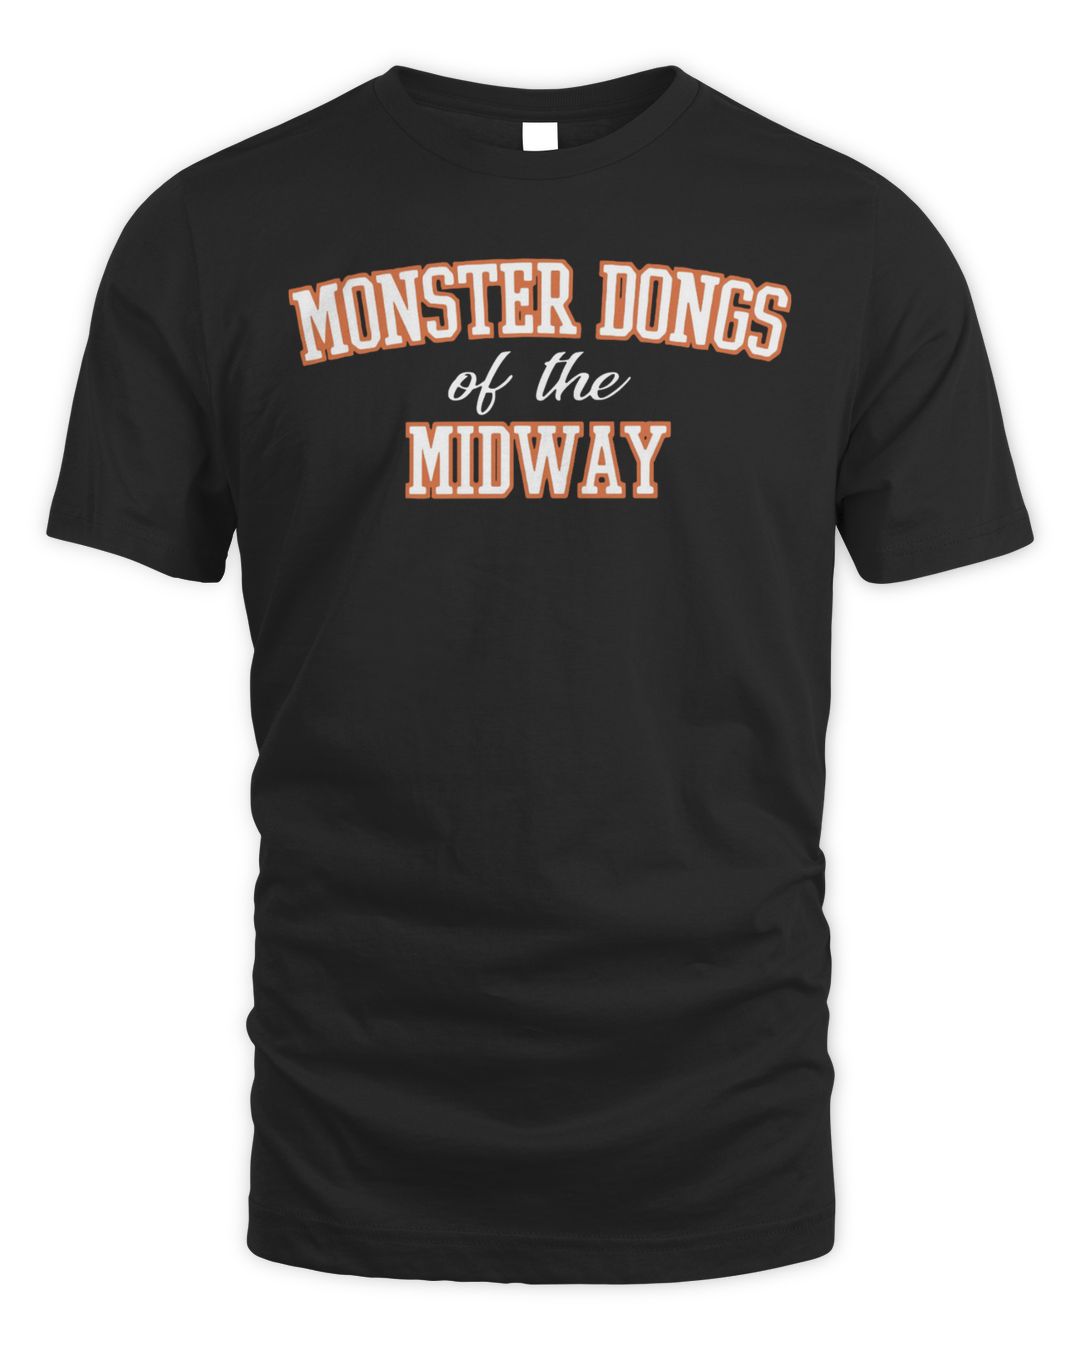 Pat Mcafee Merch Monster Dongs Of The Midway Shirt